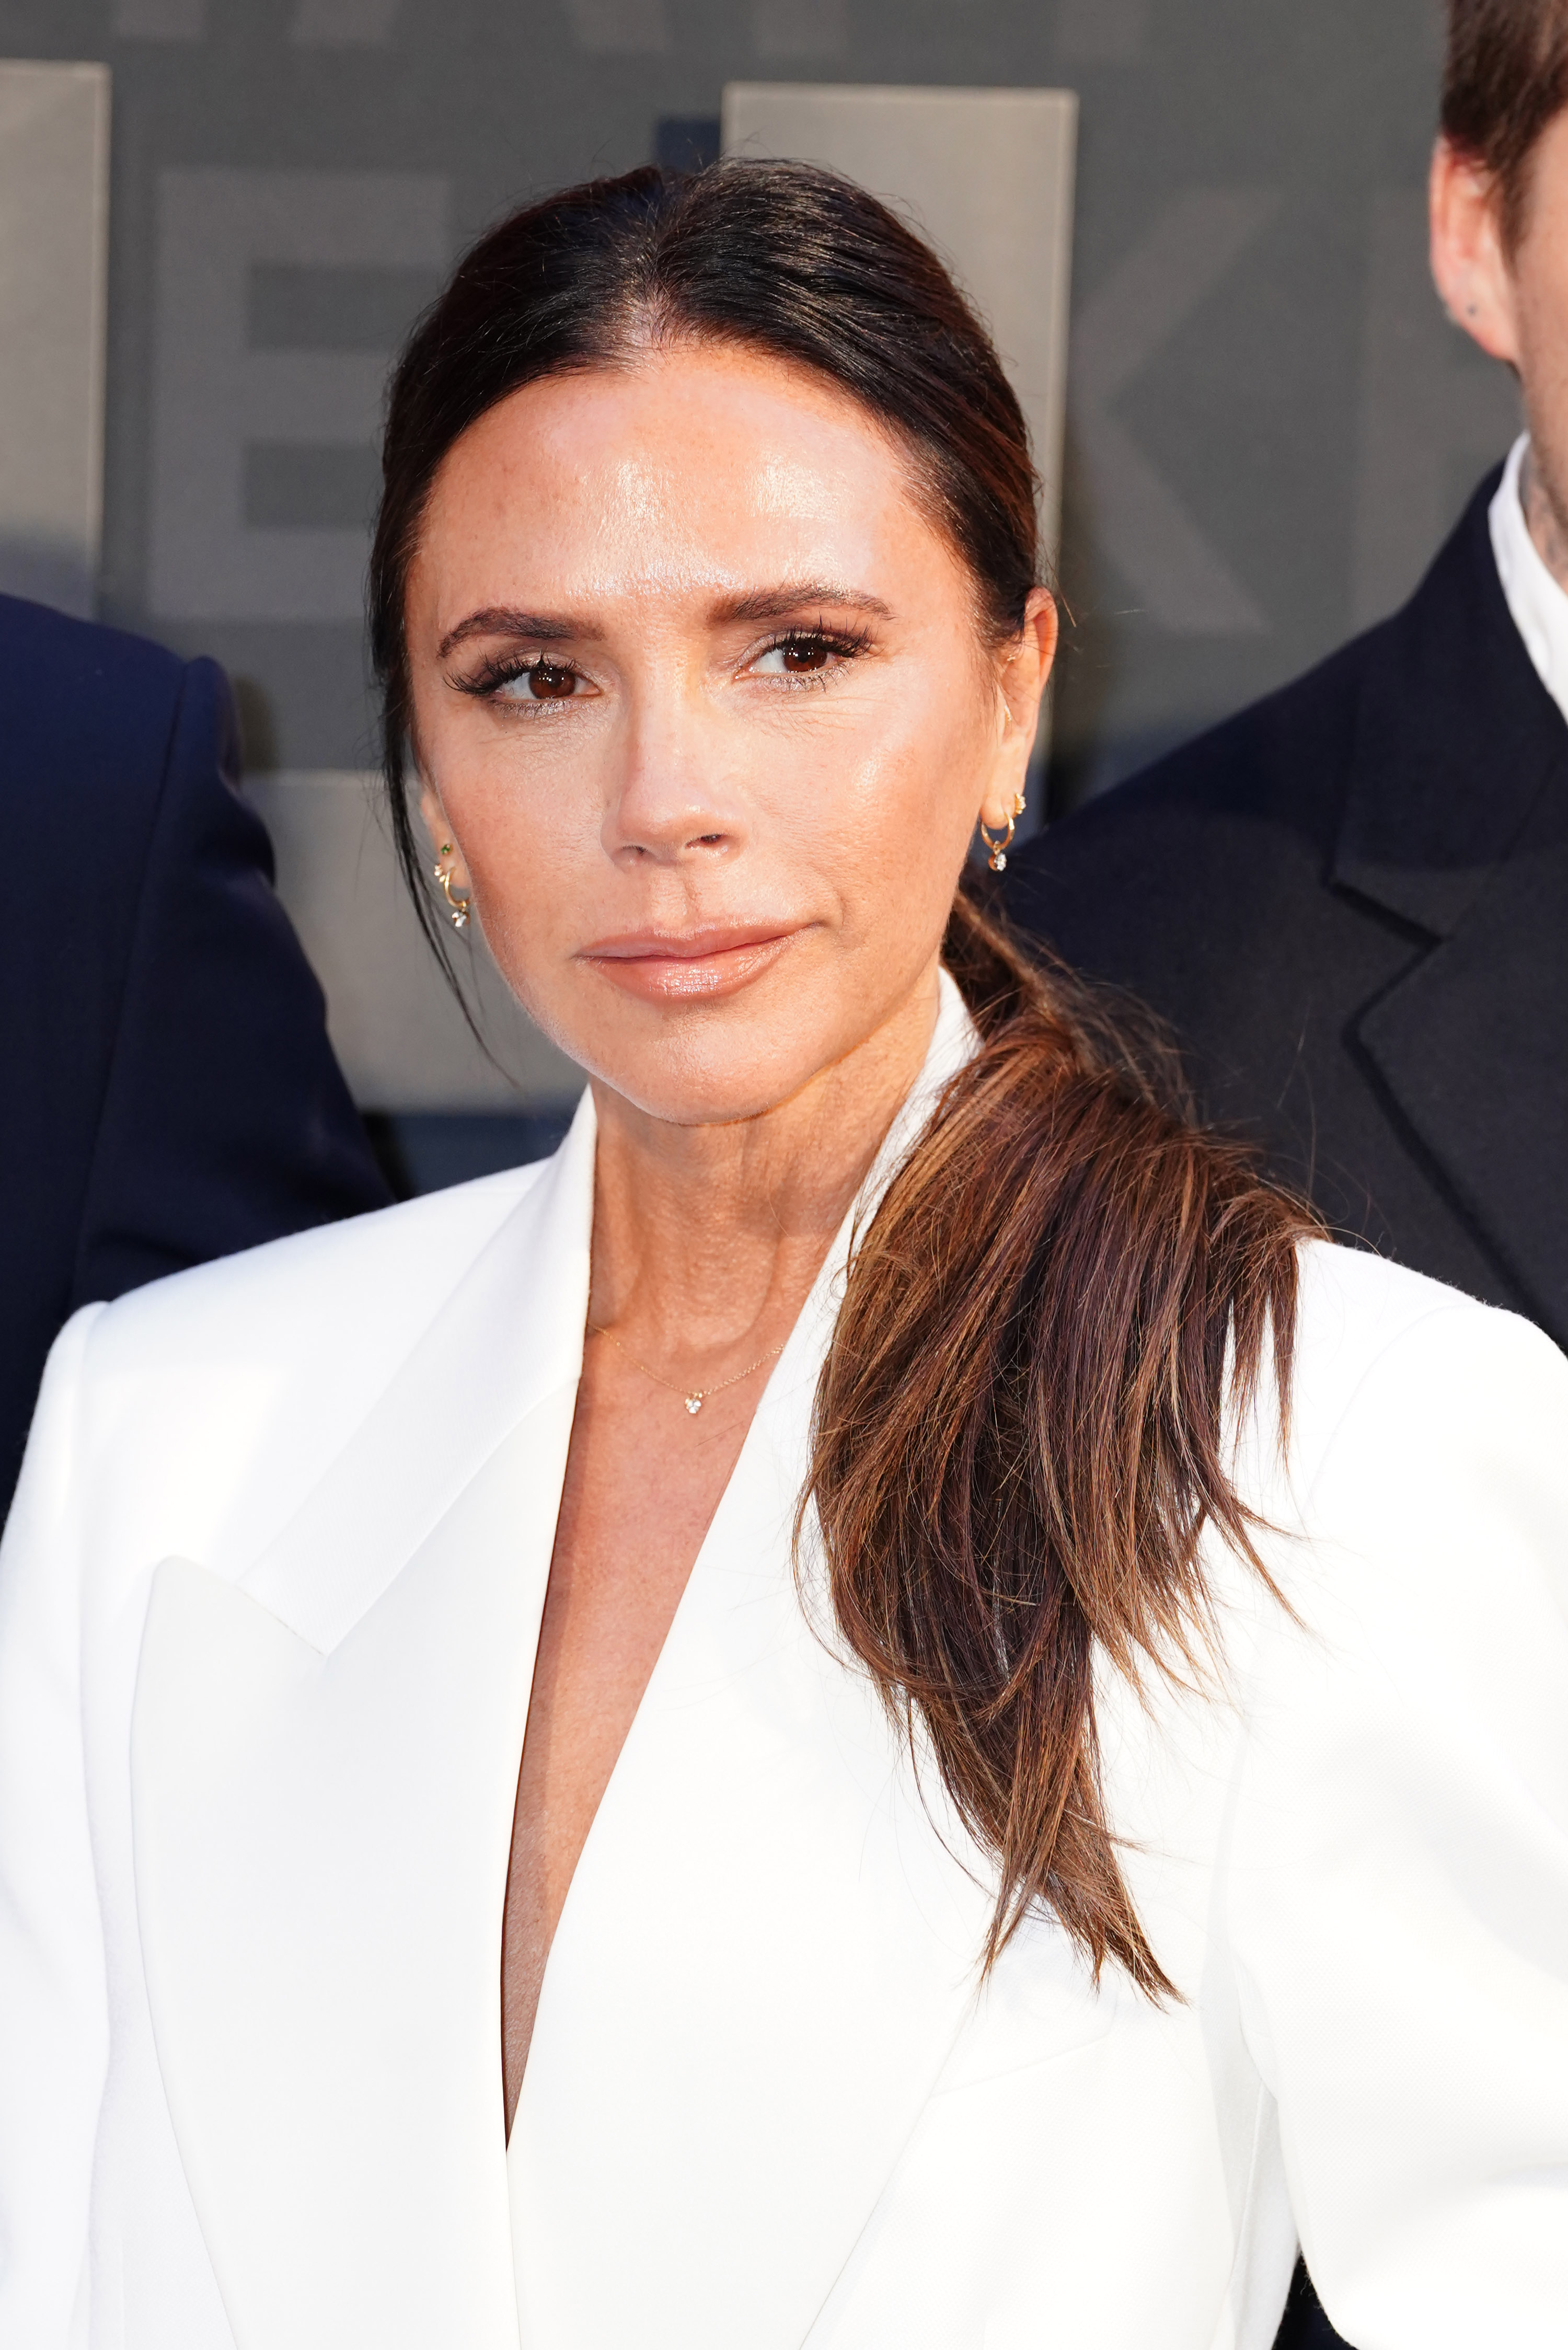 Victoria Beckham arrives for the premiere of Netflix's documentary series 'Beckham' at the Curzon Mayfair in London on October 3, 2023. | Source: Getty Images